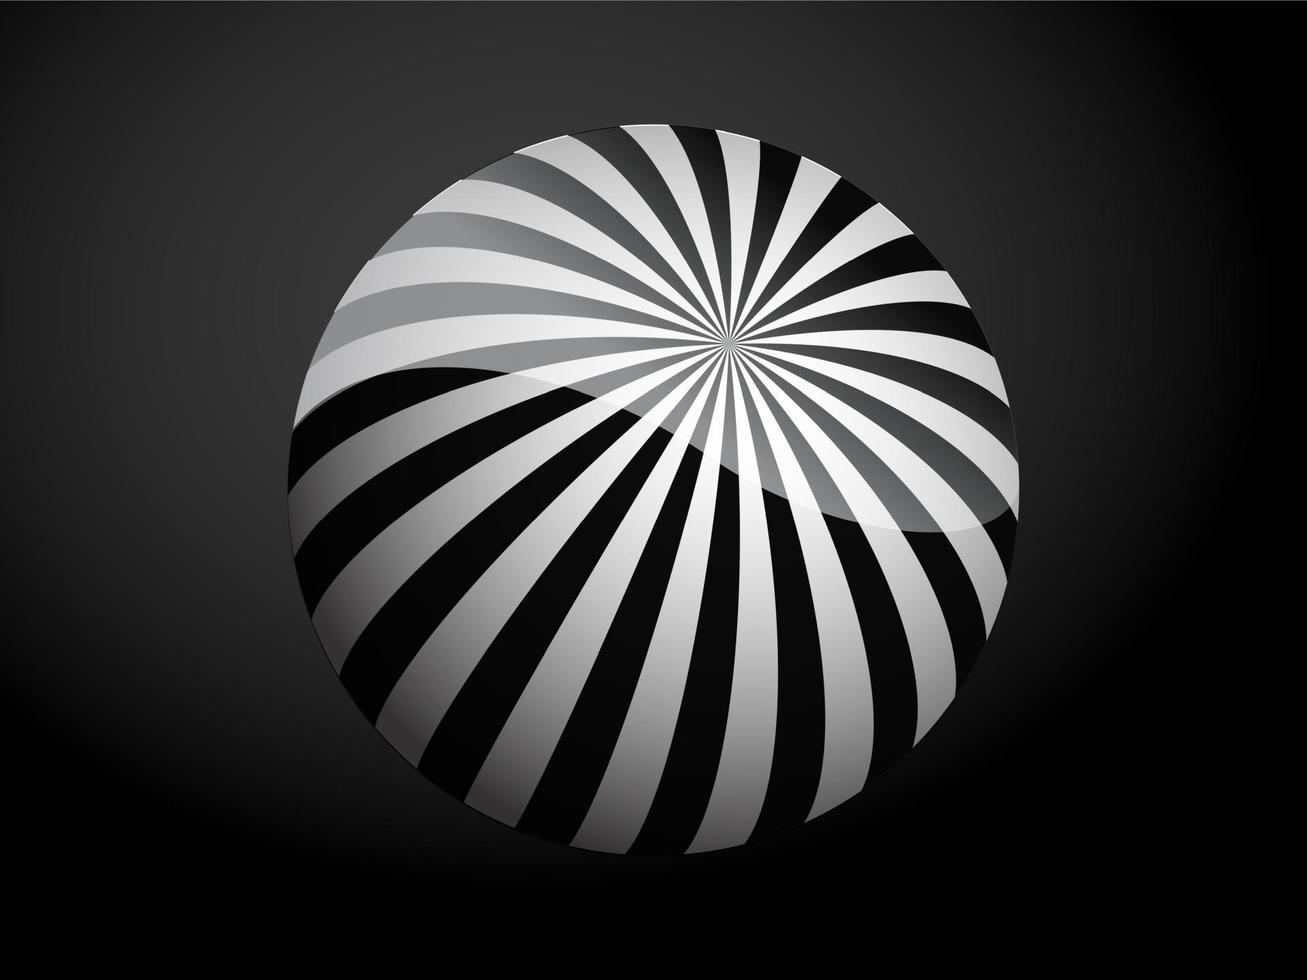 Abstract pattern cover black and white 3D ball. Vector illustration on dark background.